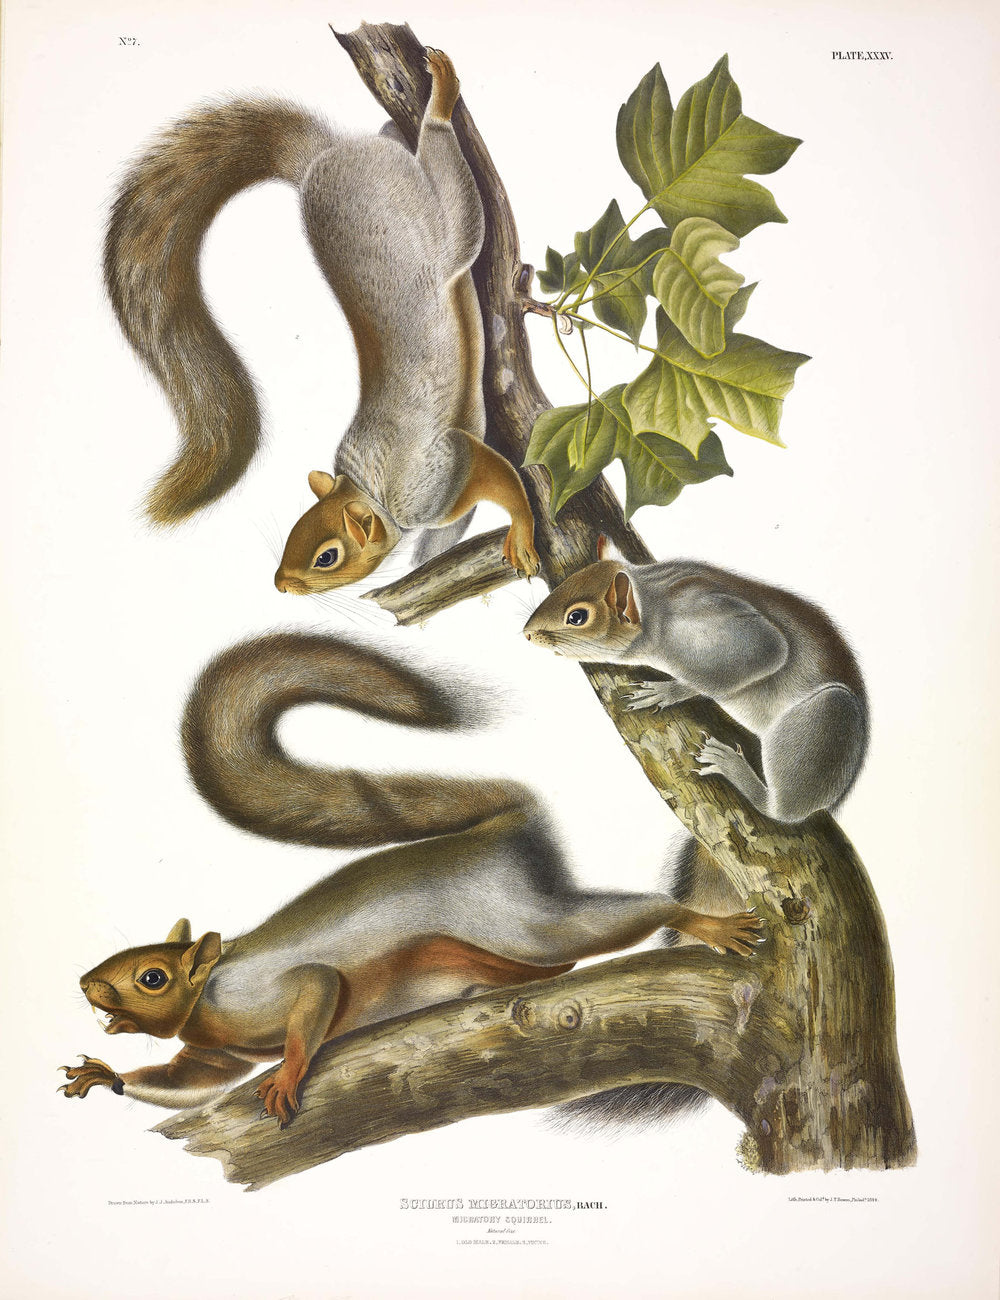 Painted by John James Audubon (1785-1851) with background likely by Victor Gifford Audubon (1809-1860)  Plate XXXV - Migratory Squirrel  From: Viviparous Quadrupeds of North America  New York: 1845-1848  Hand colored lithograph  Sheet size: 21 ¼” x 27”